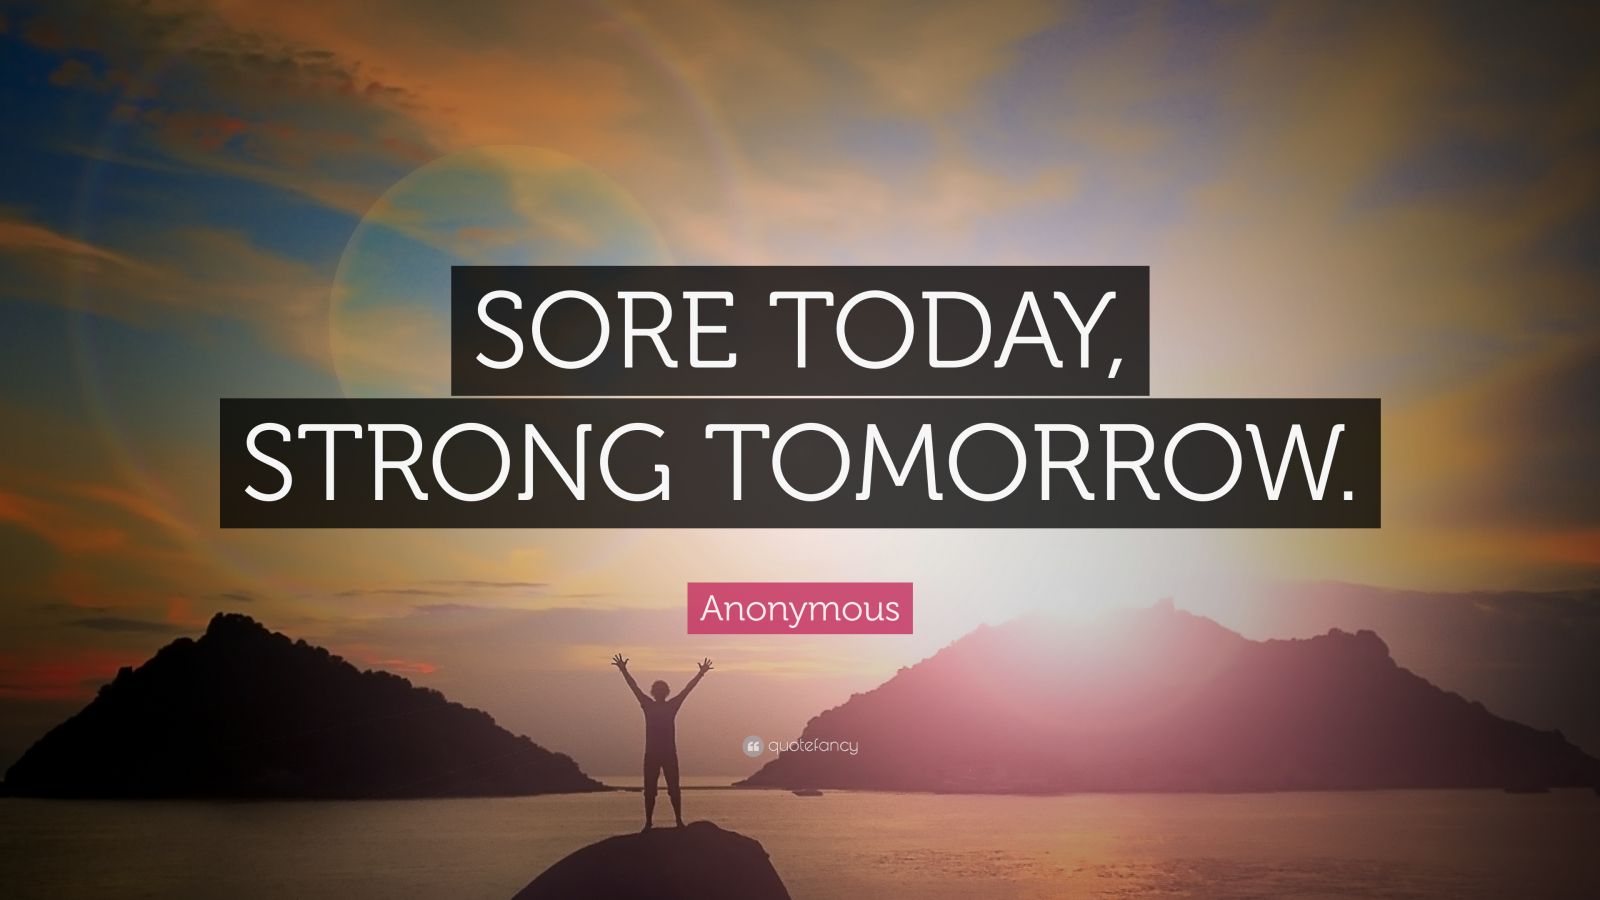 Anonymous Quote “SORE TODAY, STRONG TOMORROW.”